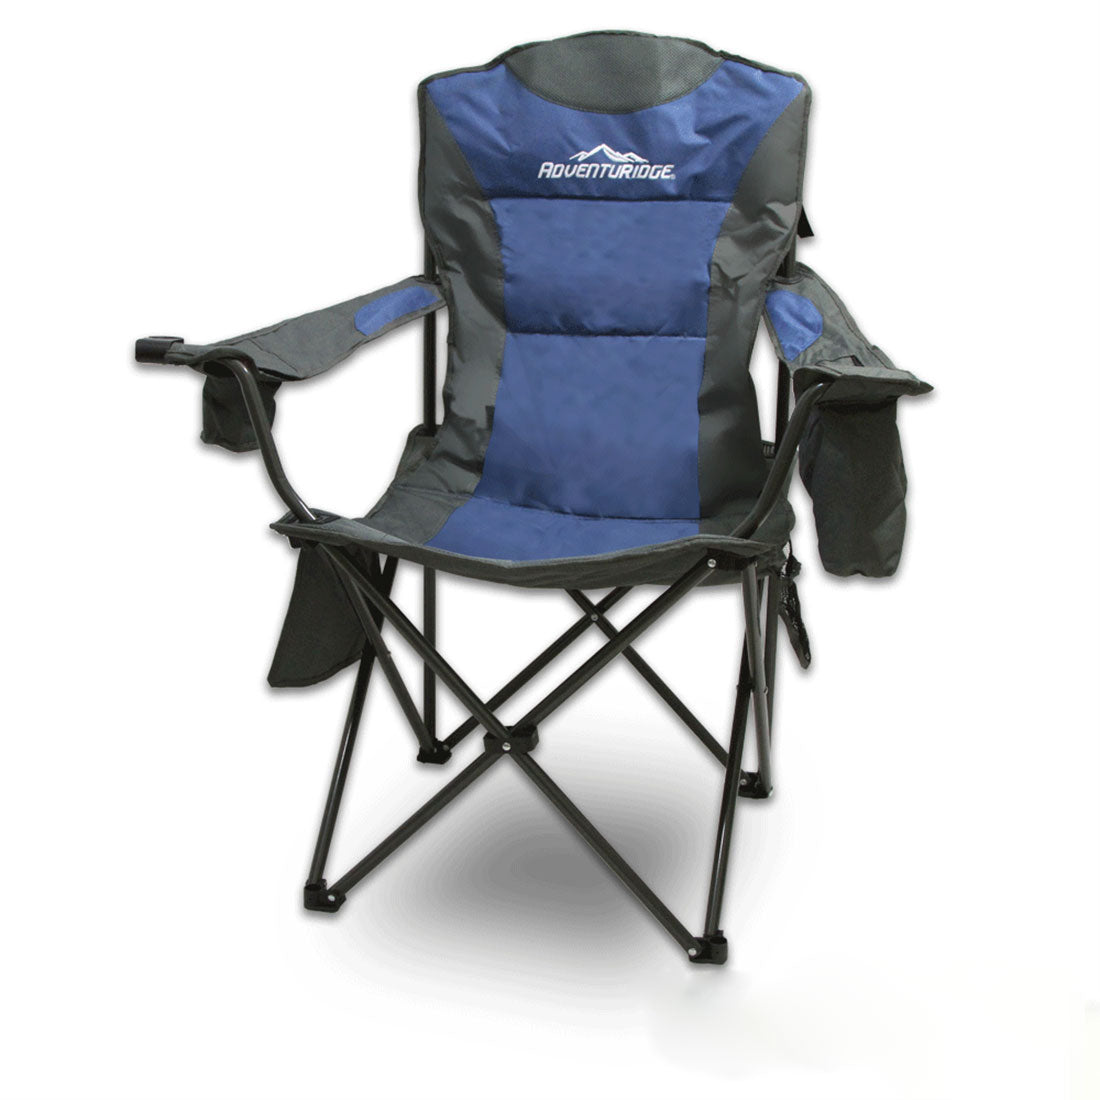 Foldable Folding Camping Chair Retreat Recliner Beach Outdoor Picnic Travel Camp - blue